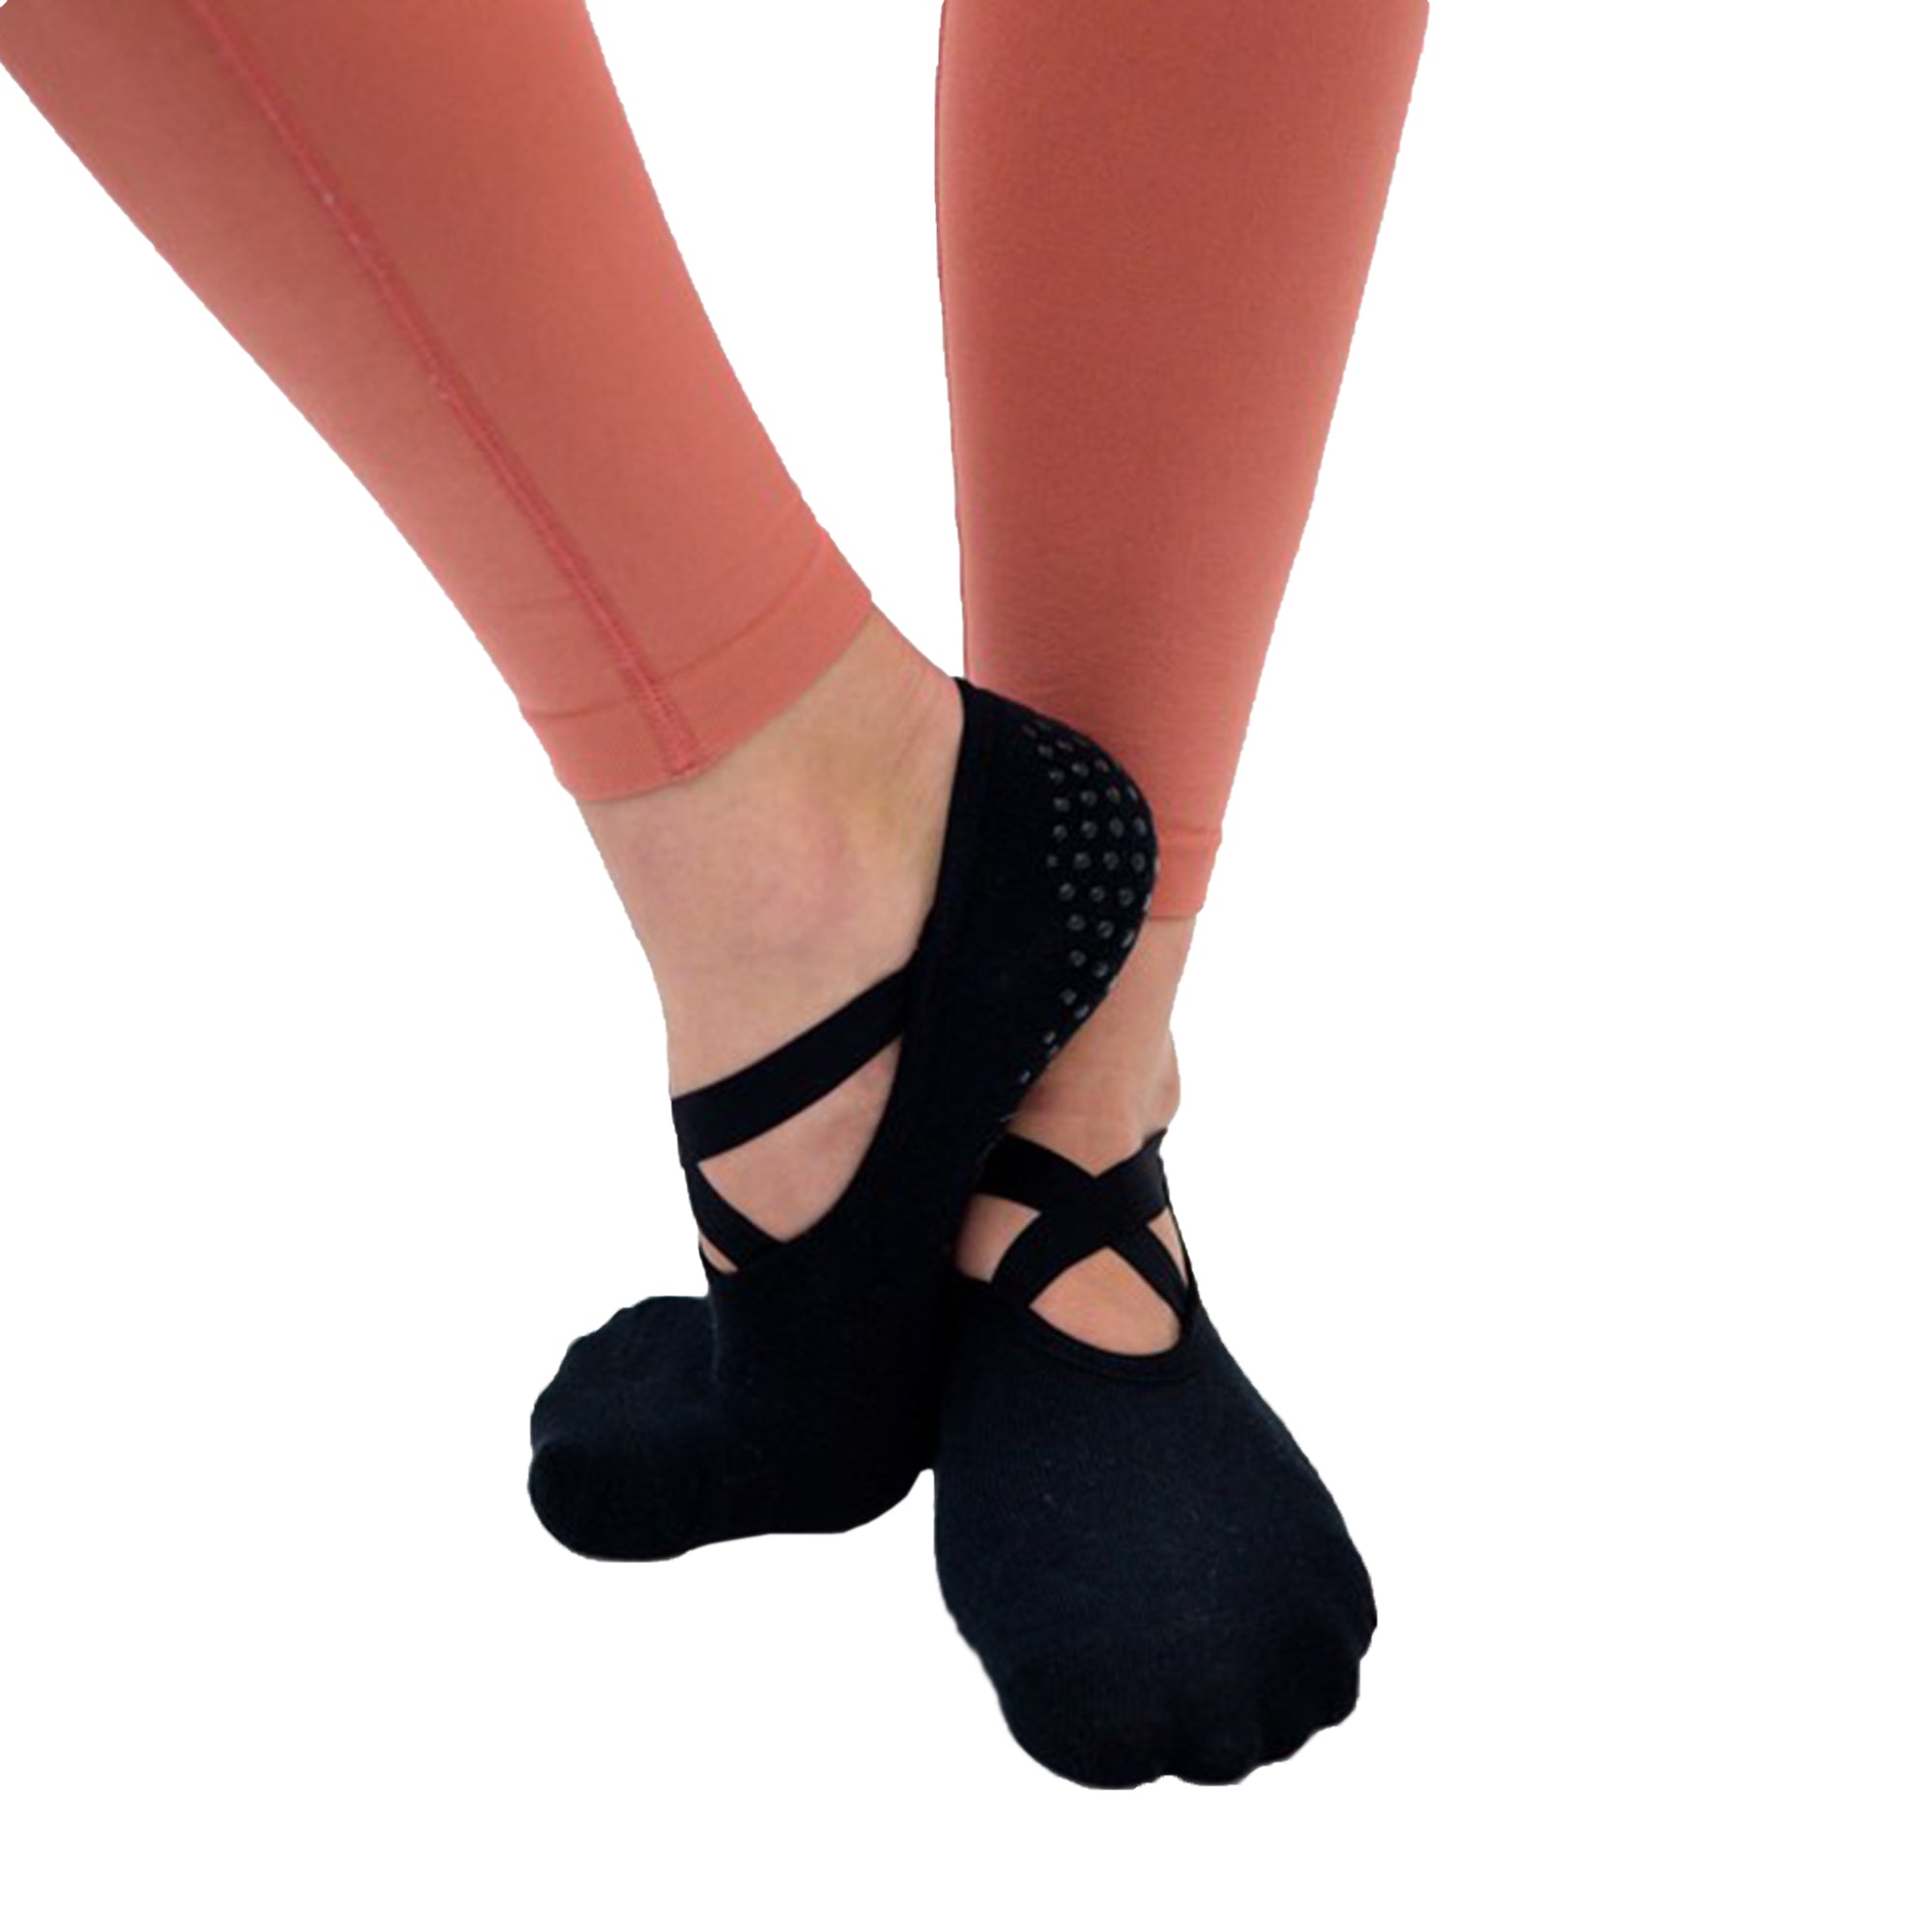 Premium Silicone Trampoline Non Slip Socks For Outdoor Sports Anti Skid,  Comfortable, Non Slip, And Ideal For Yoga, Pilates, Boating, Boat Stocking  Sox Lady Ankle Short Non Slip Sockss From Dandankang, $1.01